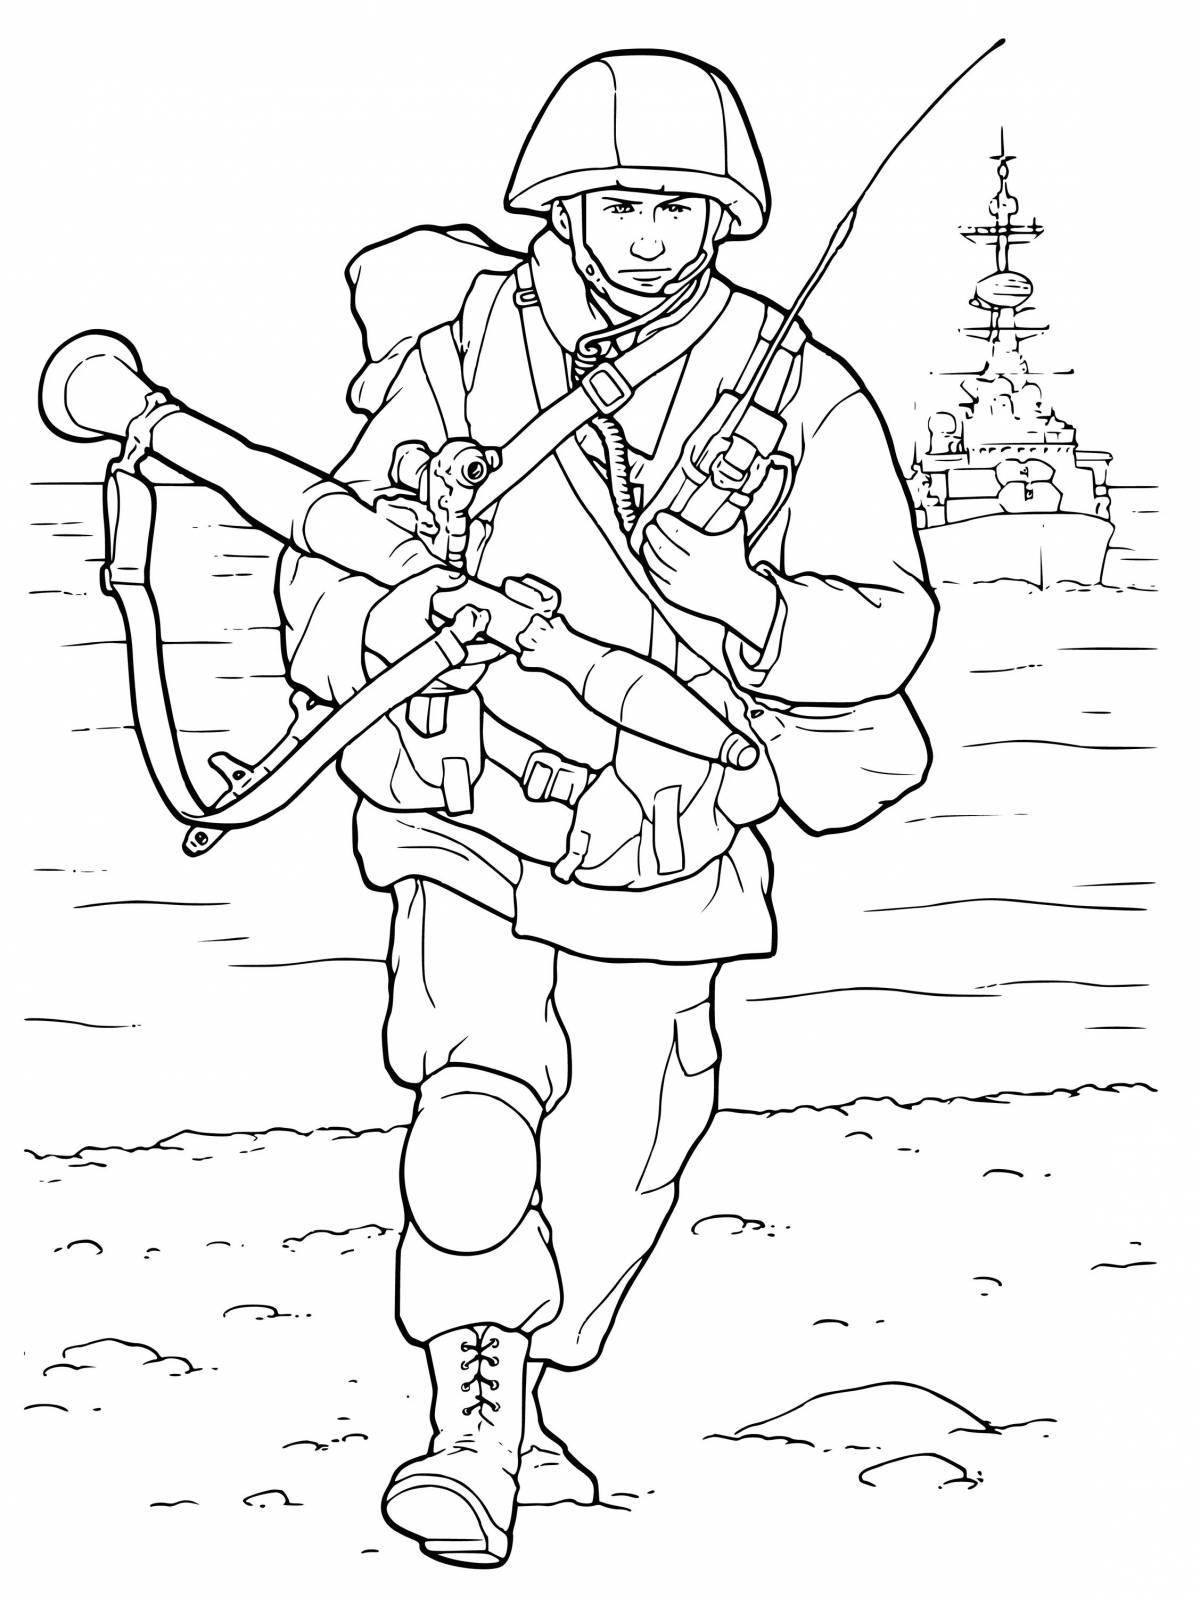 Amazing Russian soldier coloring book for kids